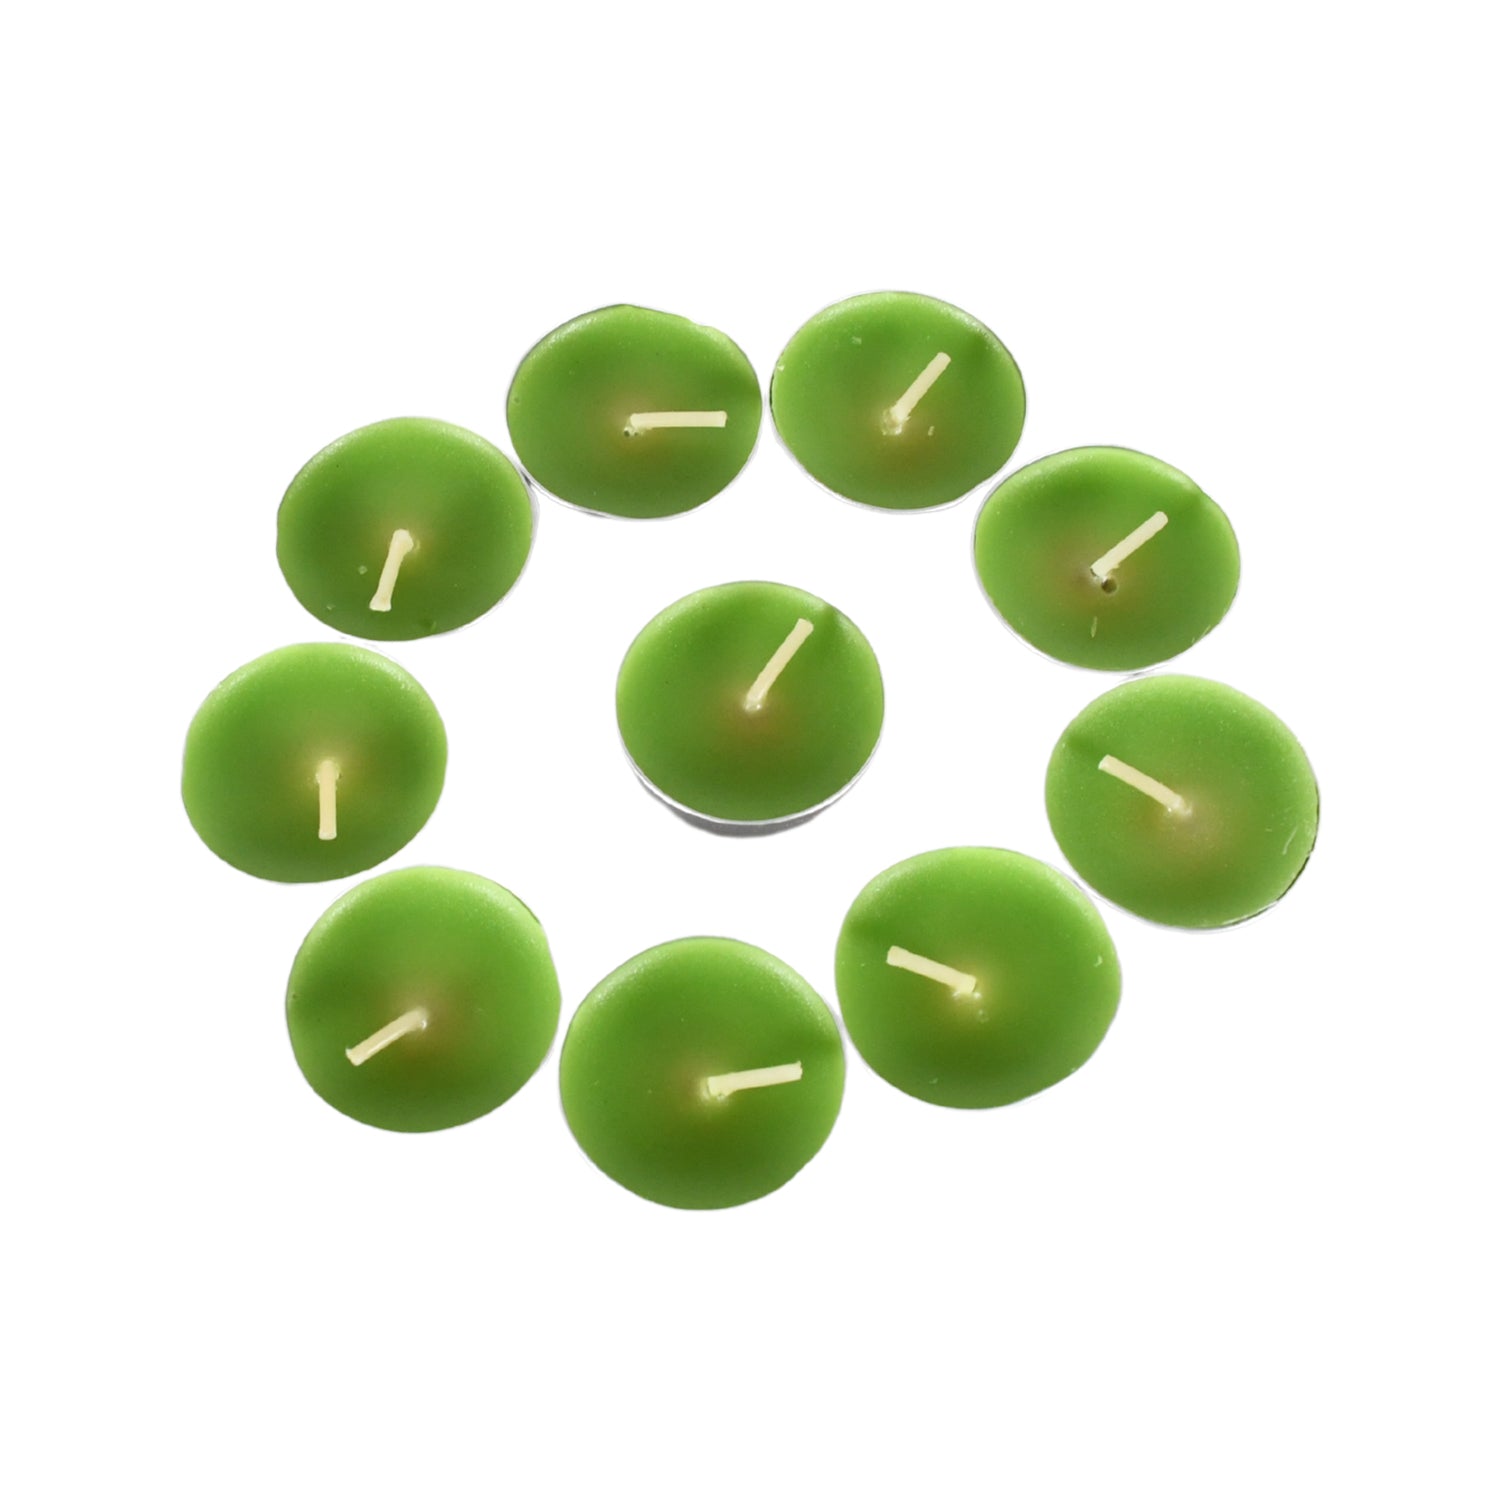 6940 8-9 Hour Burning Diwali Candles for Home Decoration Smokeless Candles for Christmas Decorations Long Burning 8-9 Hour Unscented for Mood Dinners Parities Home Decoration Wedding Candle (10 Pc)